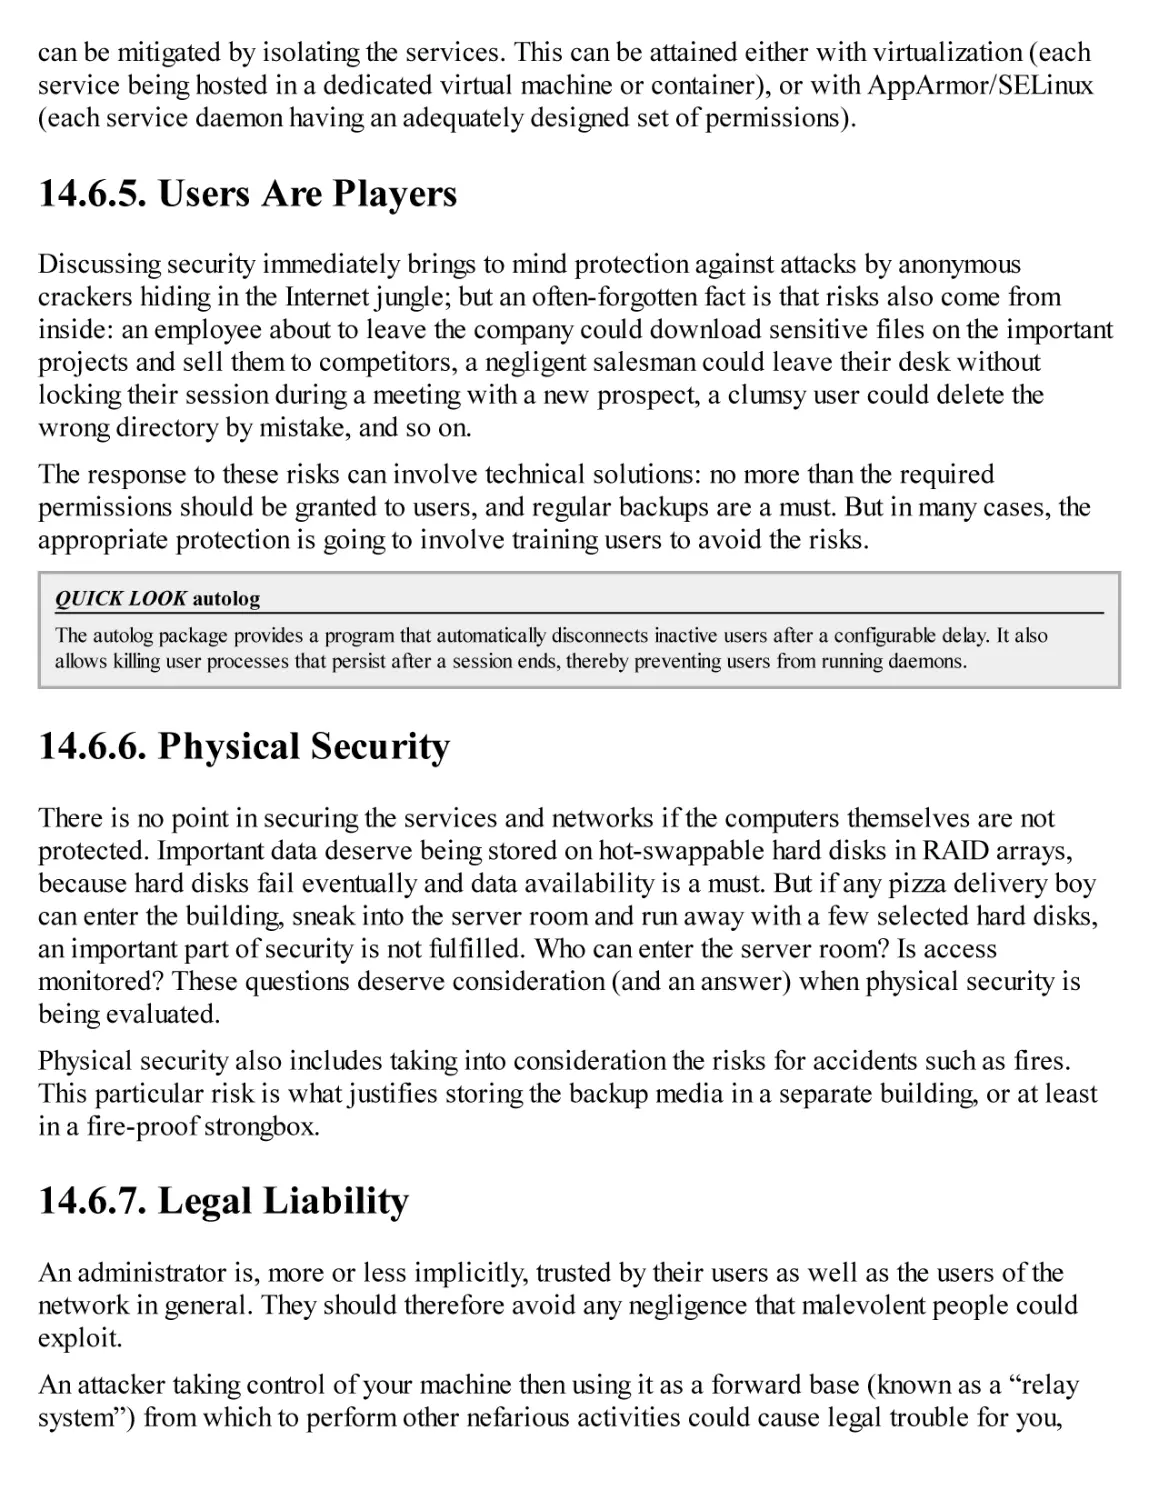 14.6.5. Users Are Players
14.6.6. Physical Security
14.6.7. Legal Liability